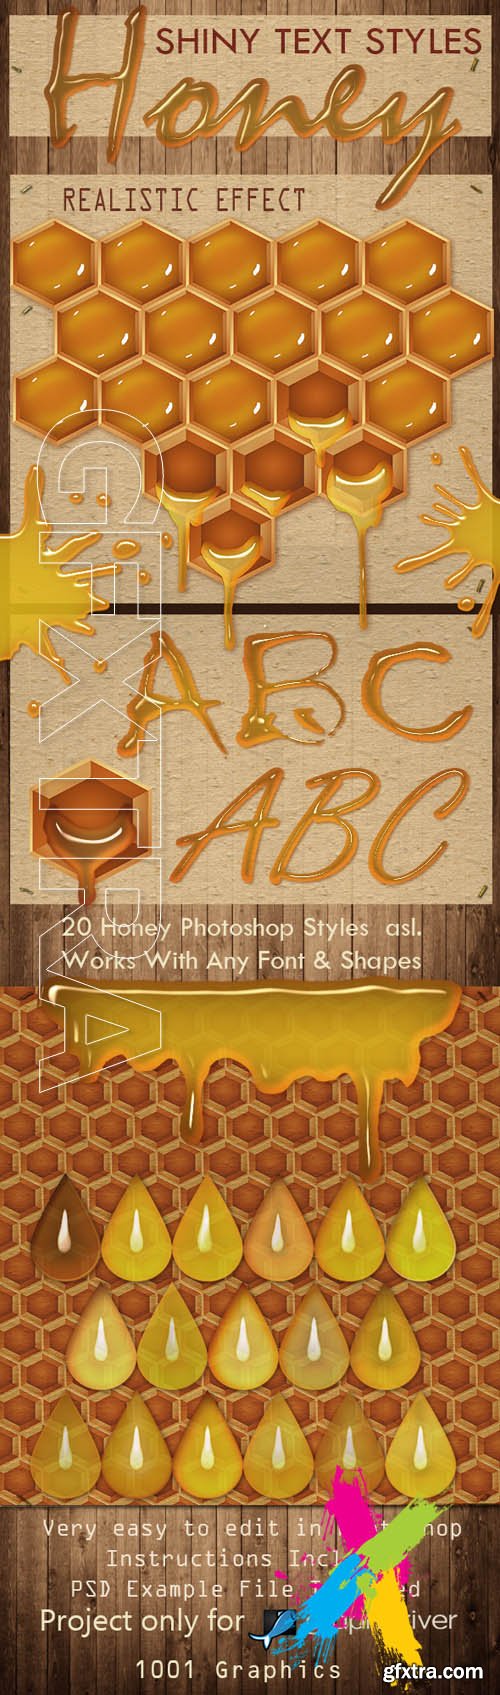 GraphicRiver - 30 HoneyText Effect PS Styles asl- Full Pack 20422546